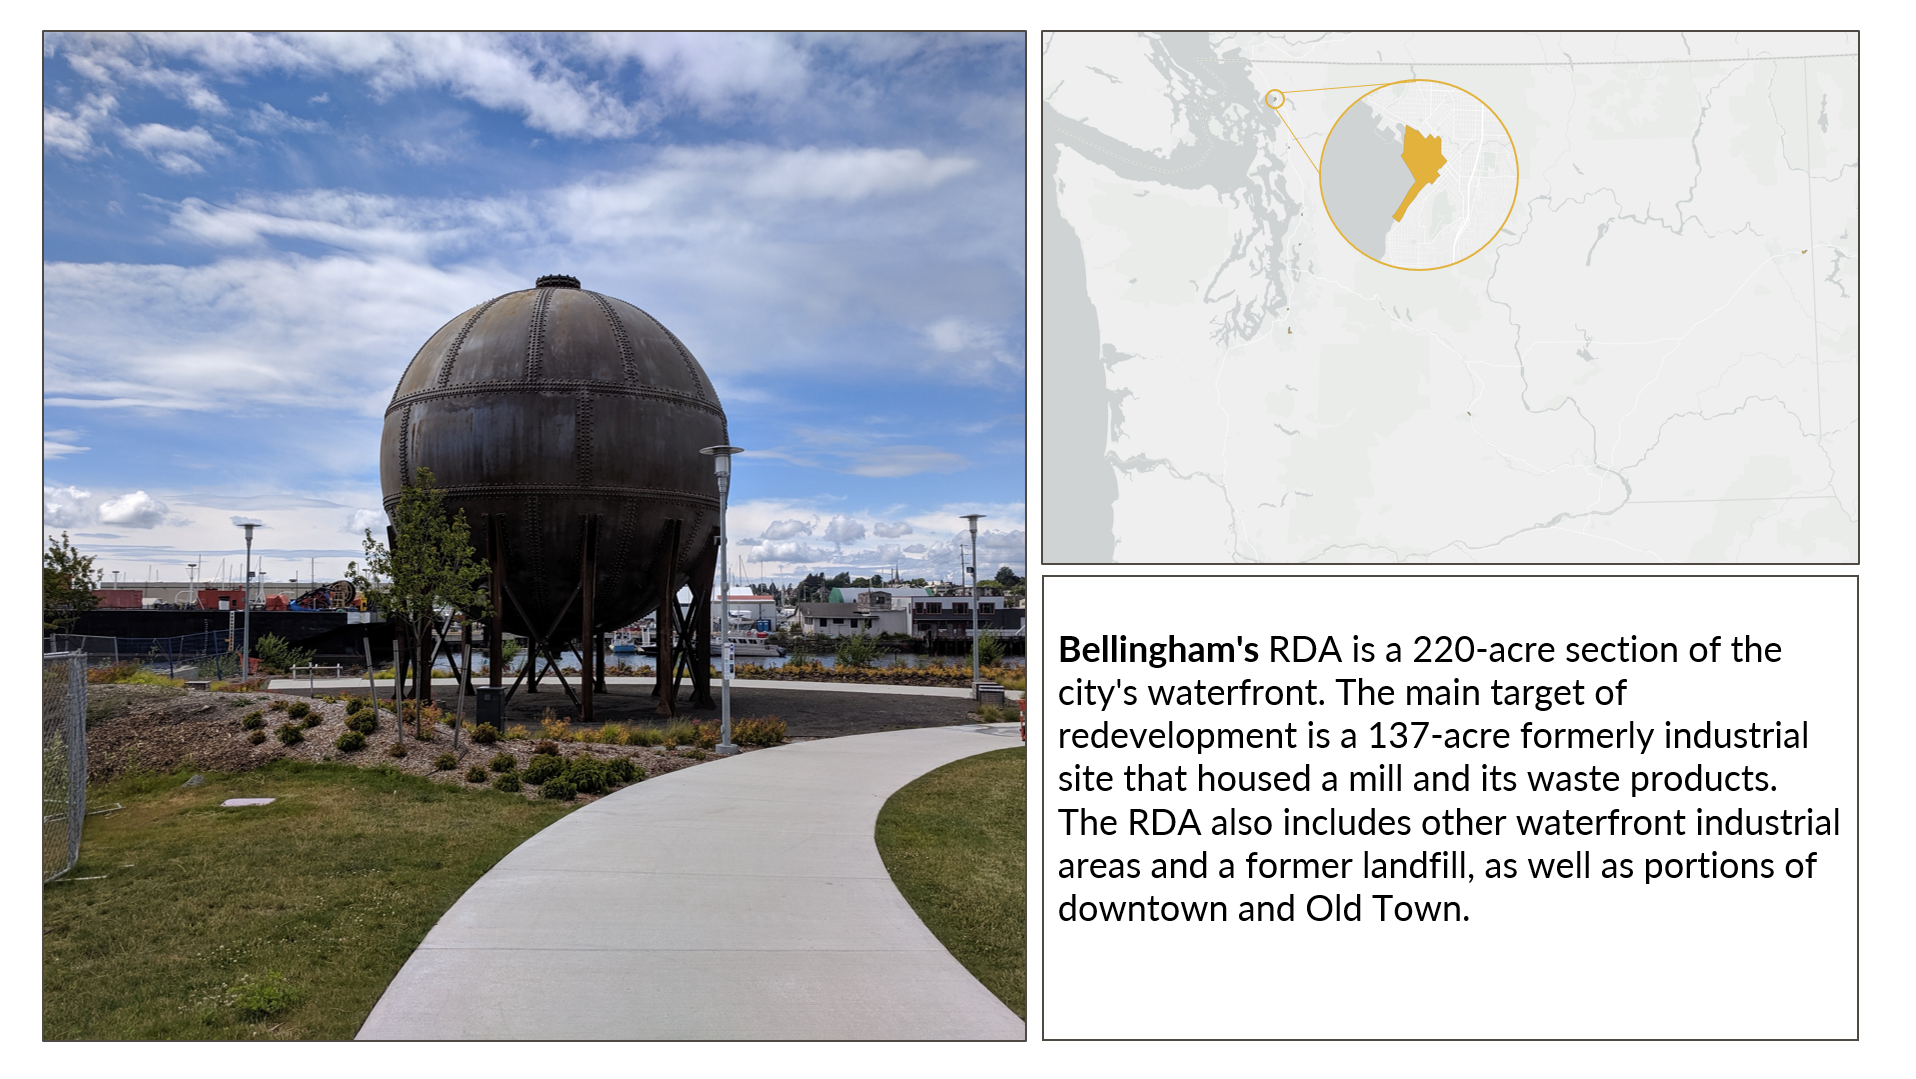 Grpahic showing map of RDA in Washington, a photo in that RDA, and the following text: Bellingham's RDA is a 220-acre section of the city's waterfront. The main target of redevelopment is a 137-acre formerly industrial site that housed a mill and its waste products. The RDA also includes other waterfront industrial areas and a former landfill, as well as portions of downtown and Old Town.
                  